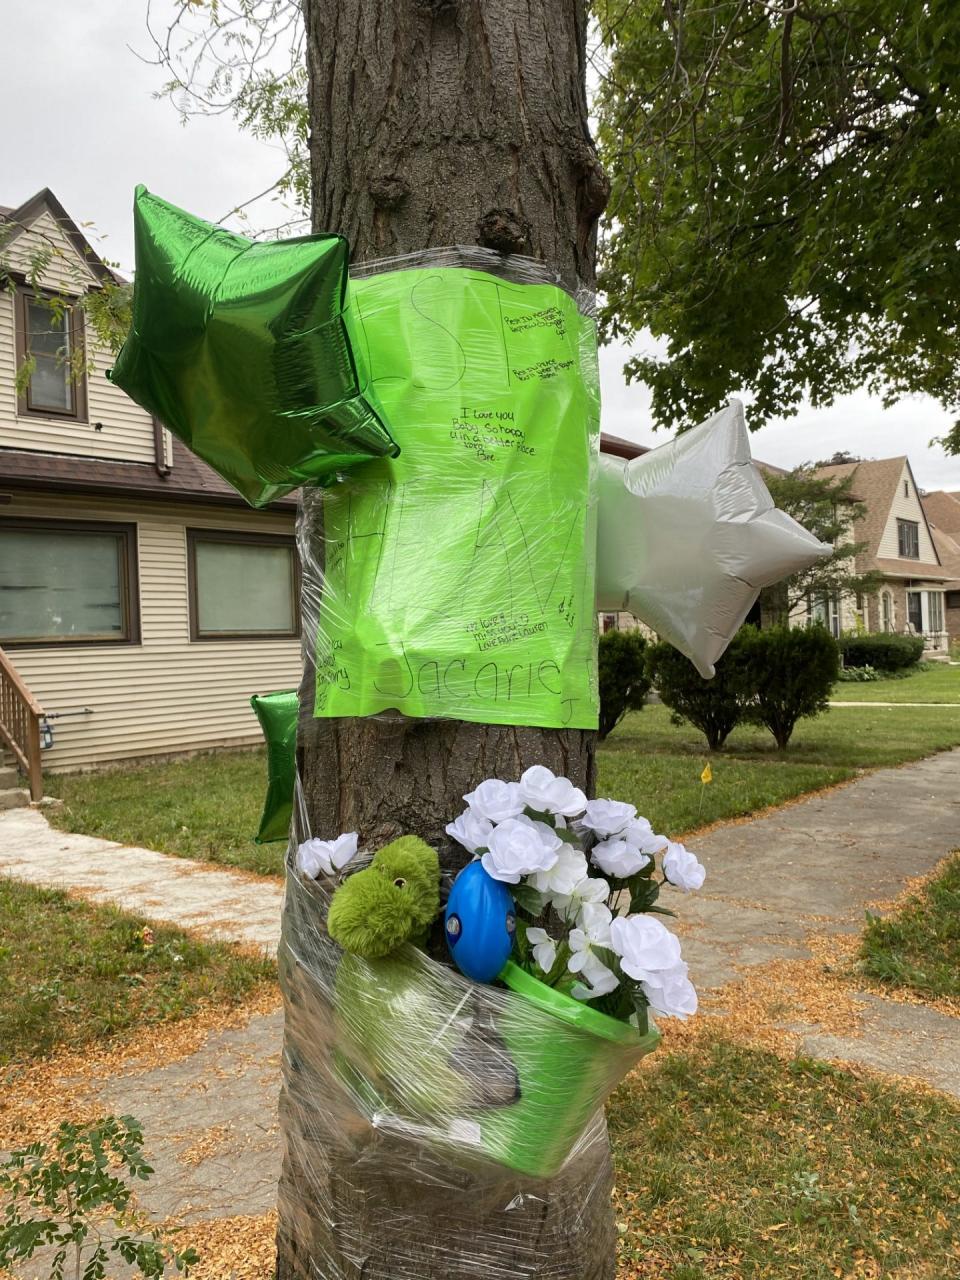 Flowers and balloons were laid out in a memorial for Jacarie Robinson outside the home where his body was found on Milwaukee's northwest side.